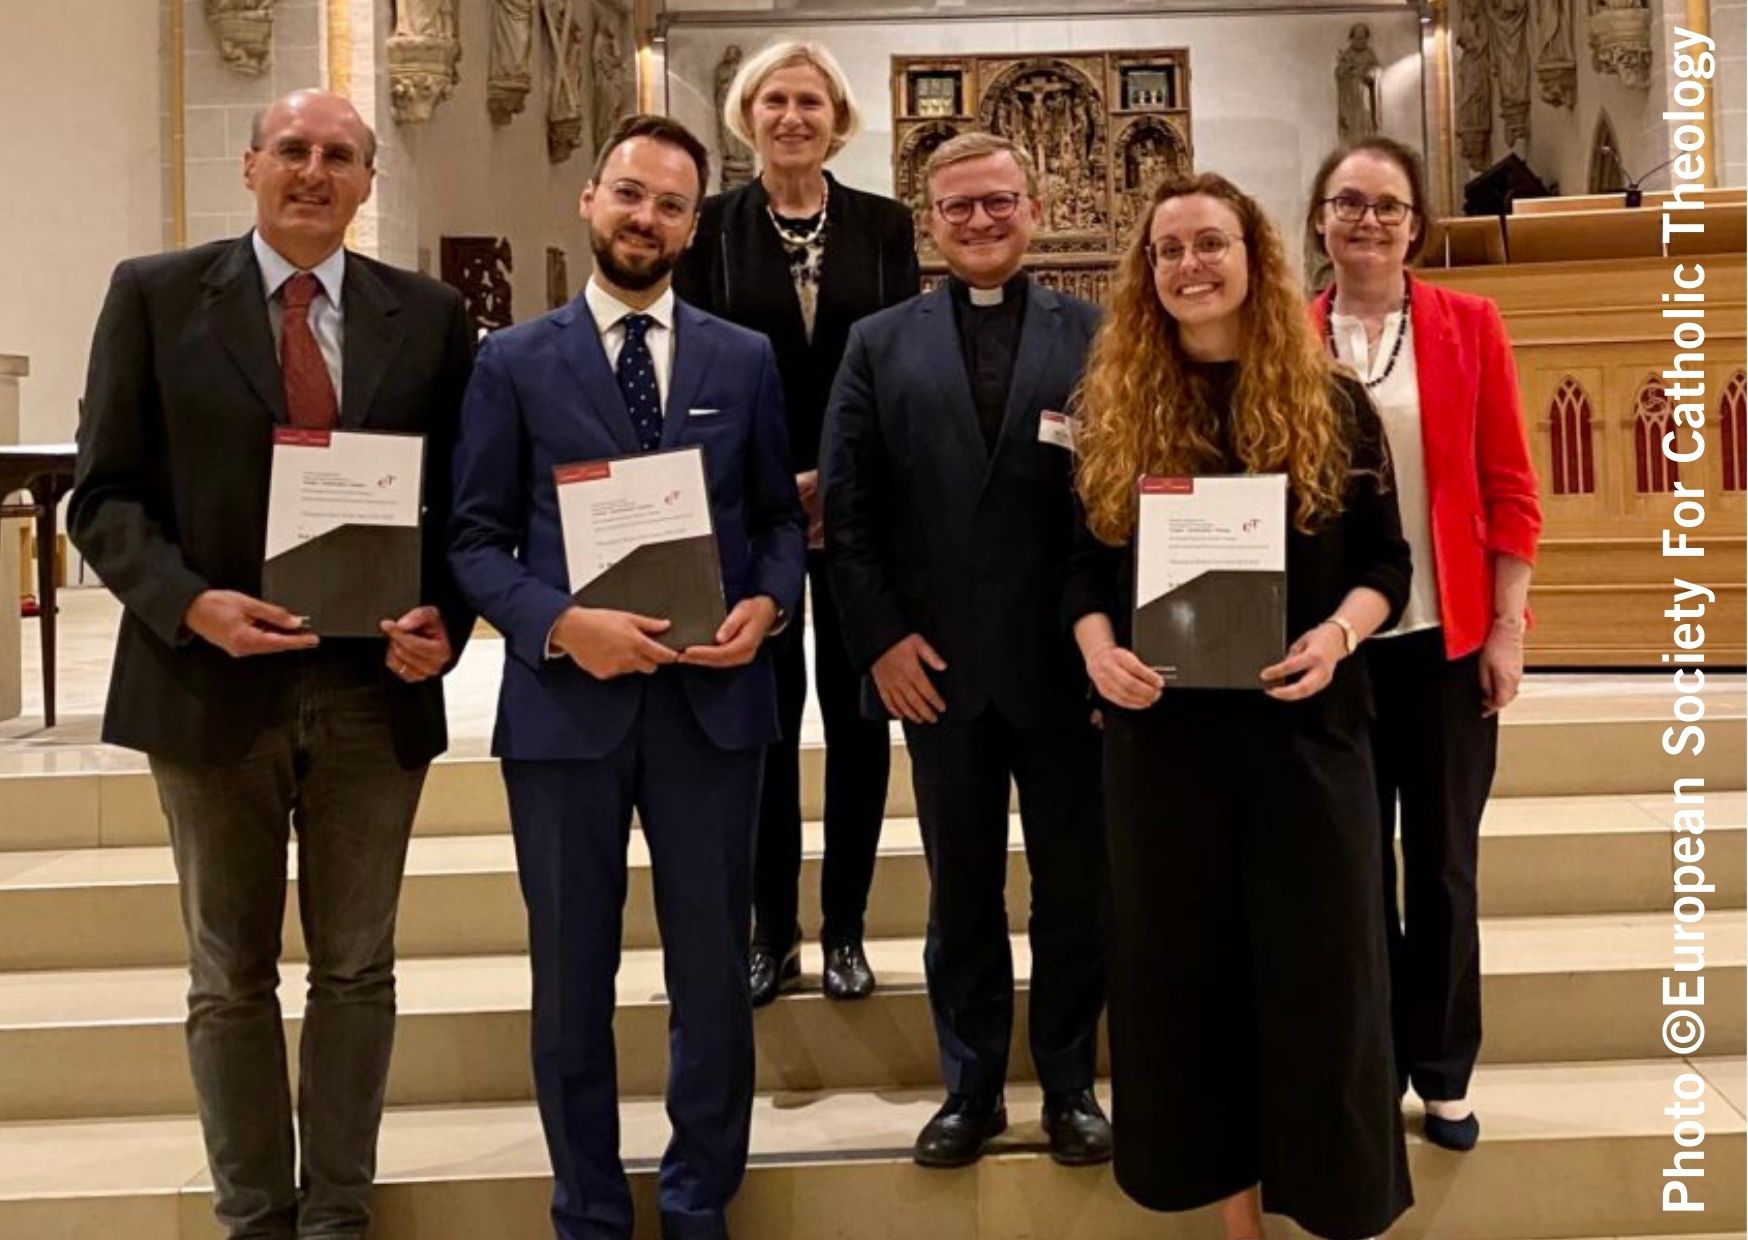 European Society for Catholic Theology book prizes award ceremony. the winners are standing the chancel steps 